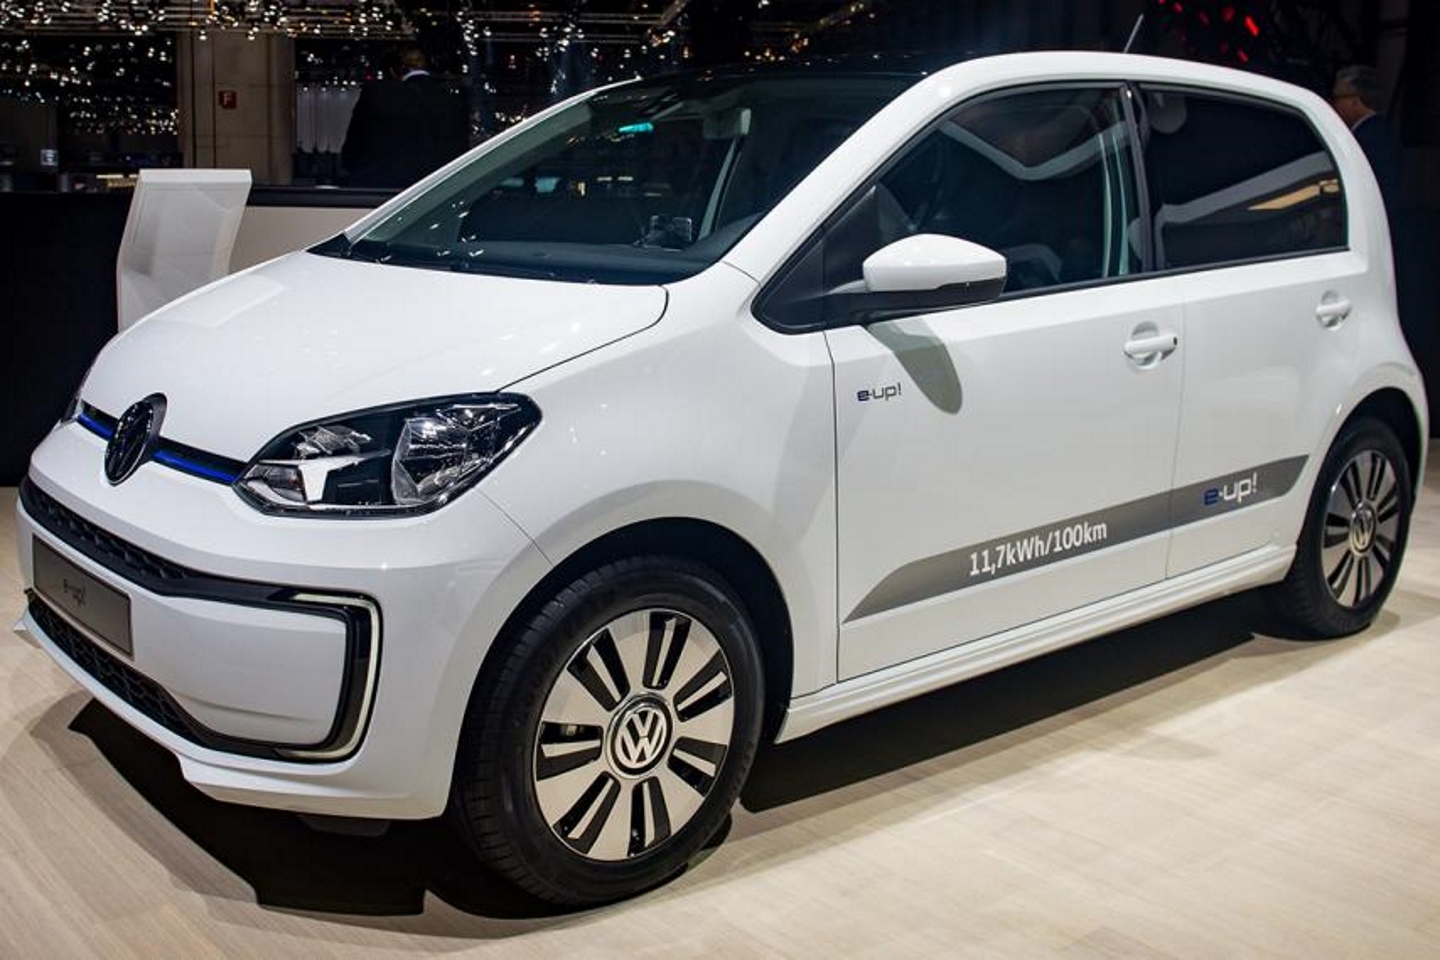 VW e-up!. Фото: Robert Hradil/Getty Images